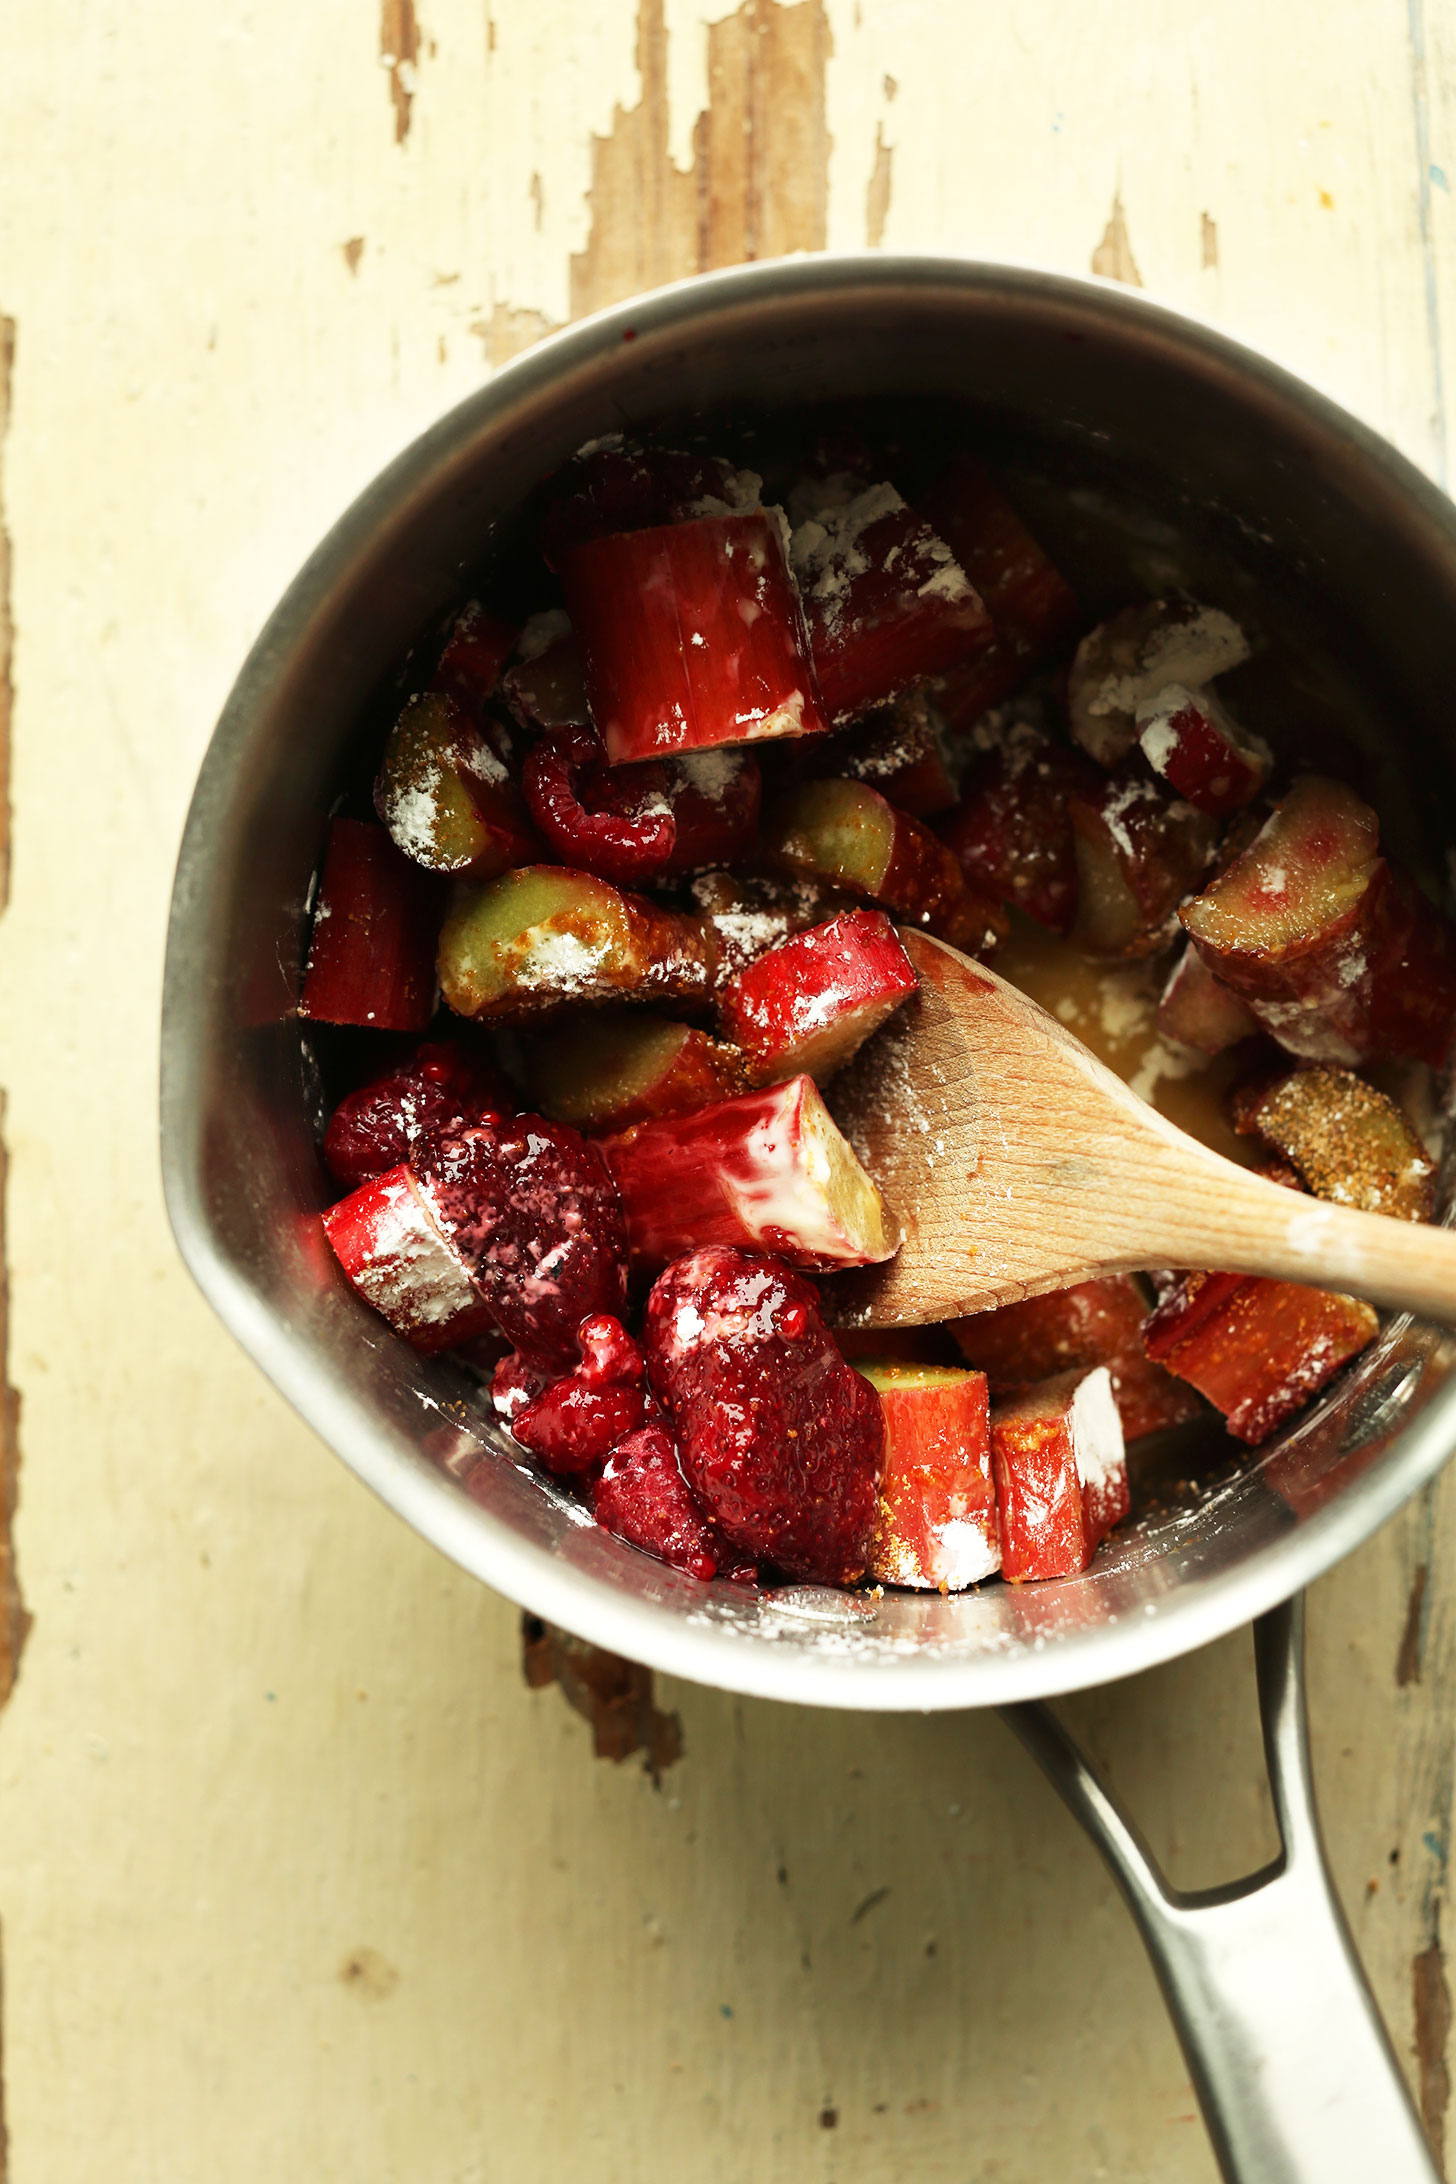 Stirring rhubarb and strawberries in a saucepan for our crumble bar filling